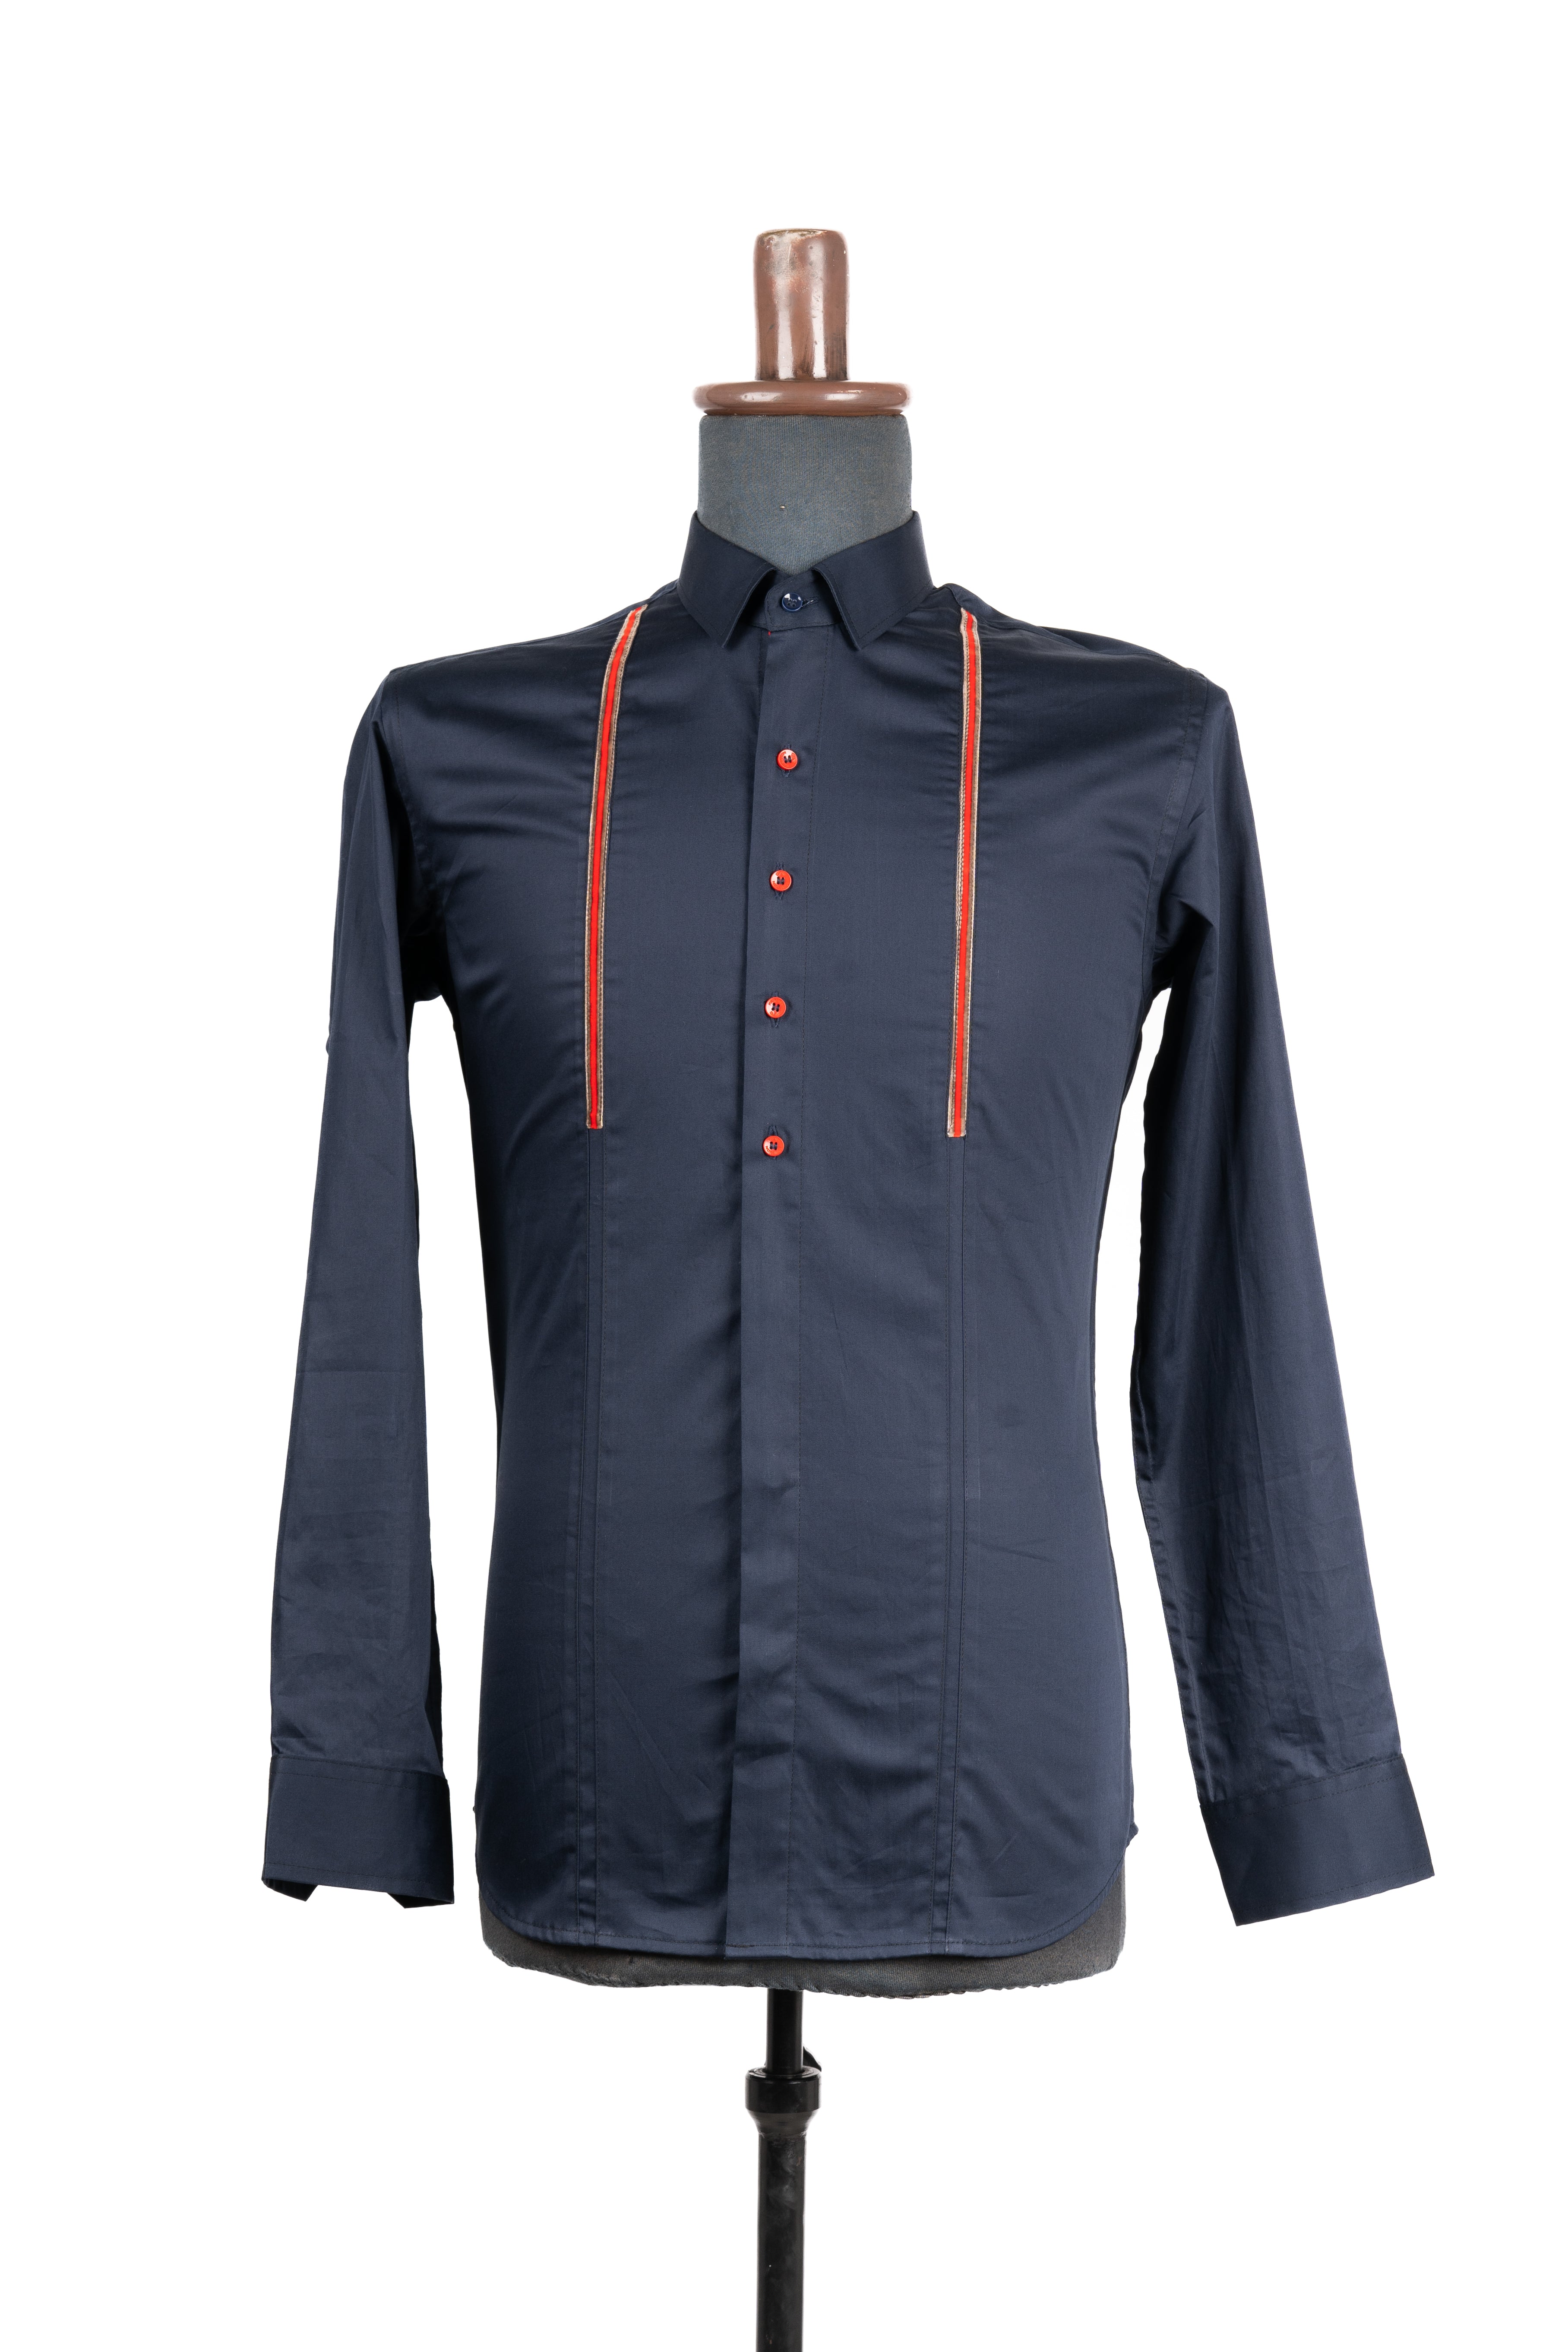 Navy blue shirt with embedded red lace